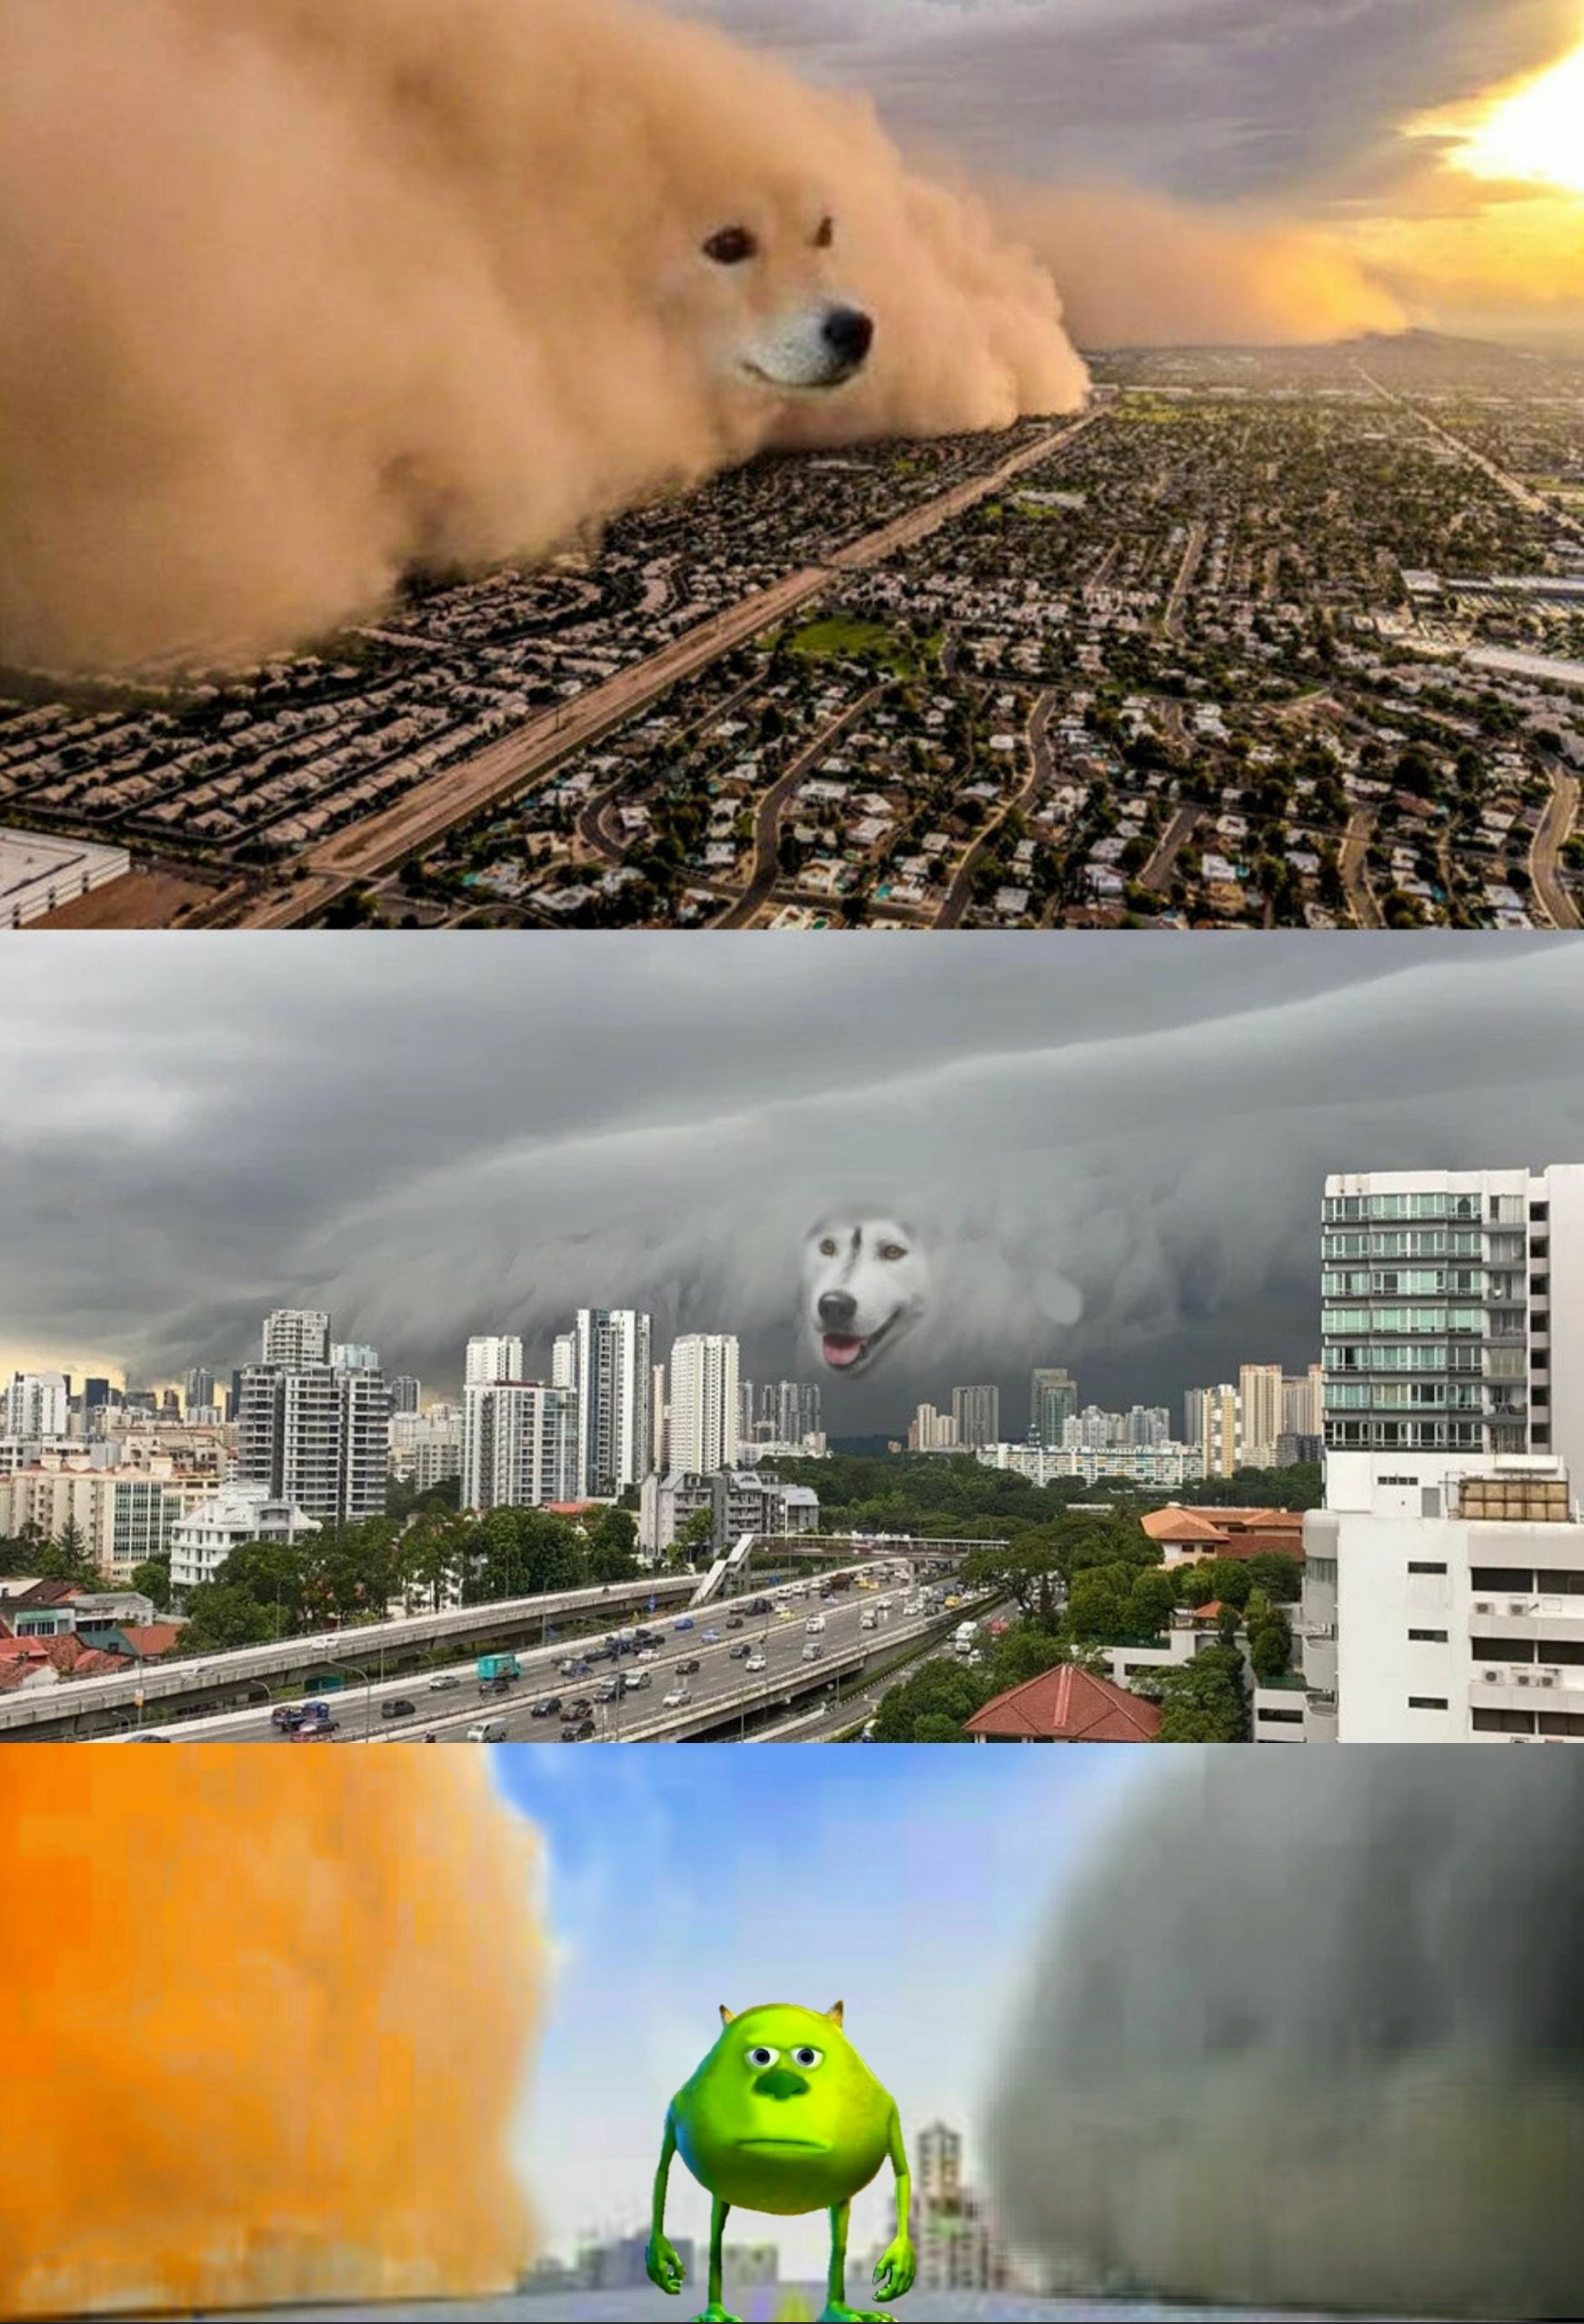 2 Large clouds of doge covering the city